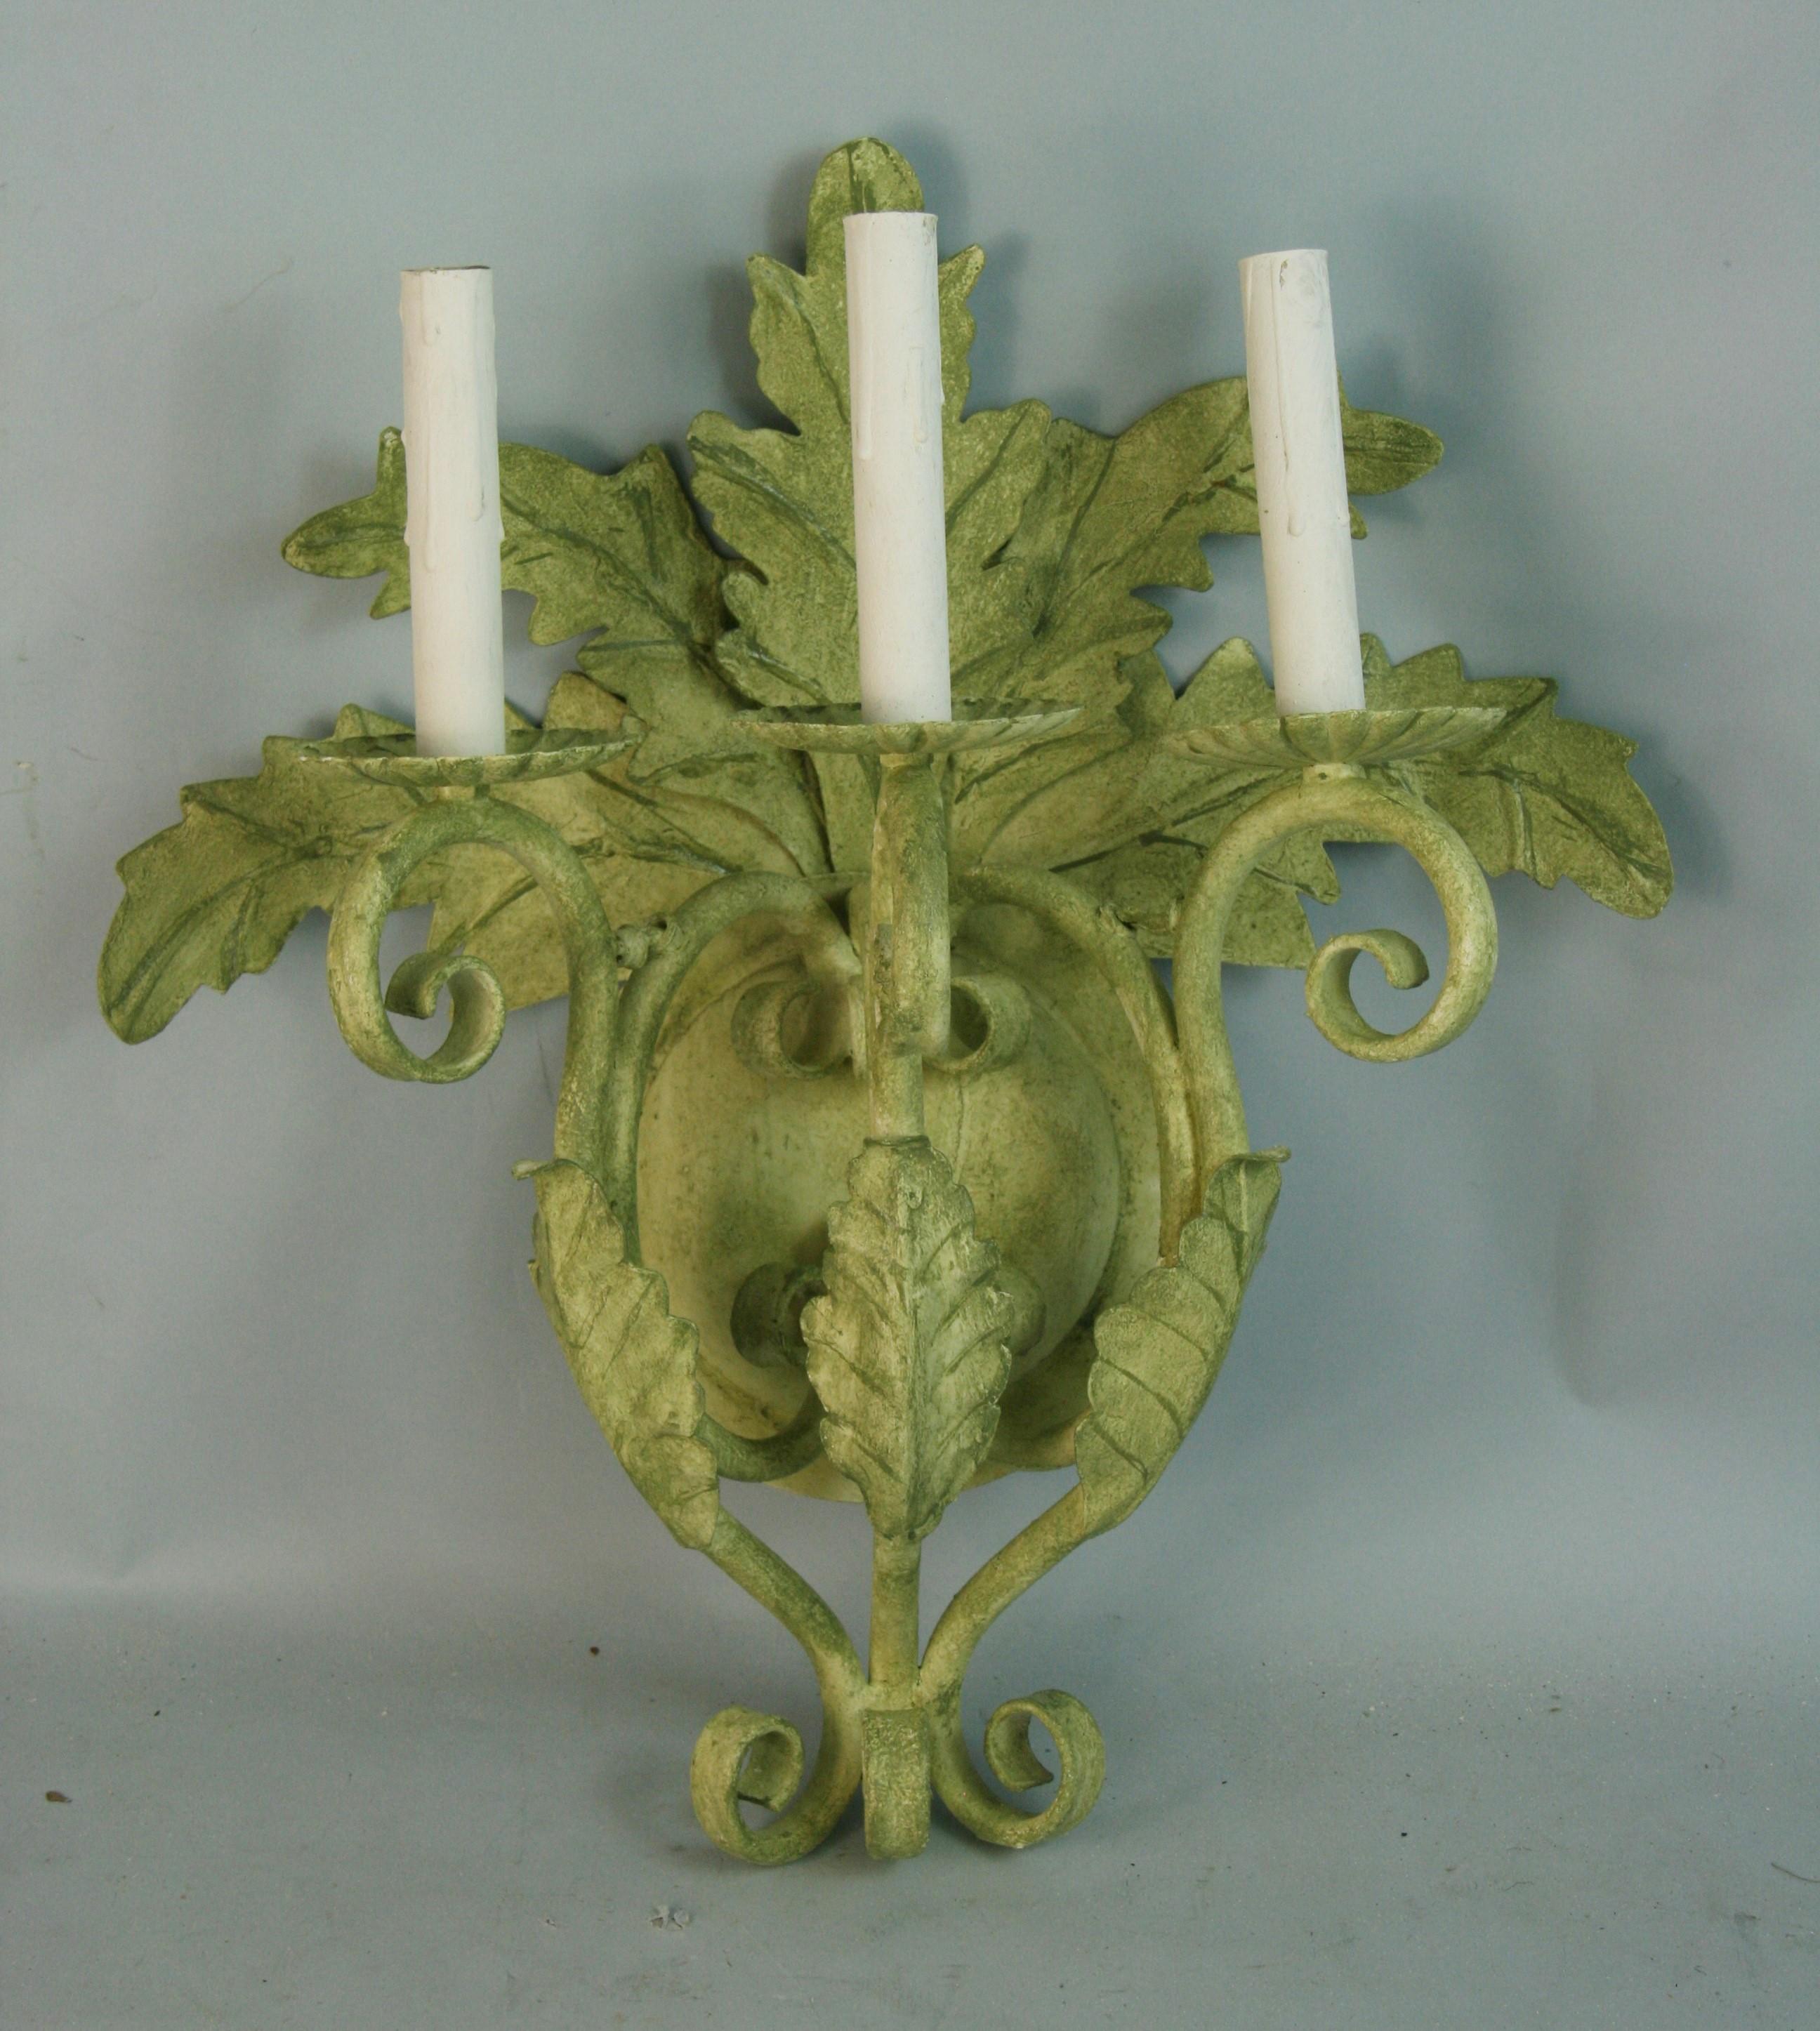 8-215 pair of large 3-light hand painted green palm frond  sconces
Takes 40 watt candelabra based bulbs.